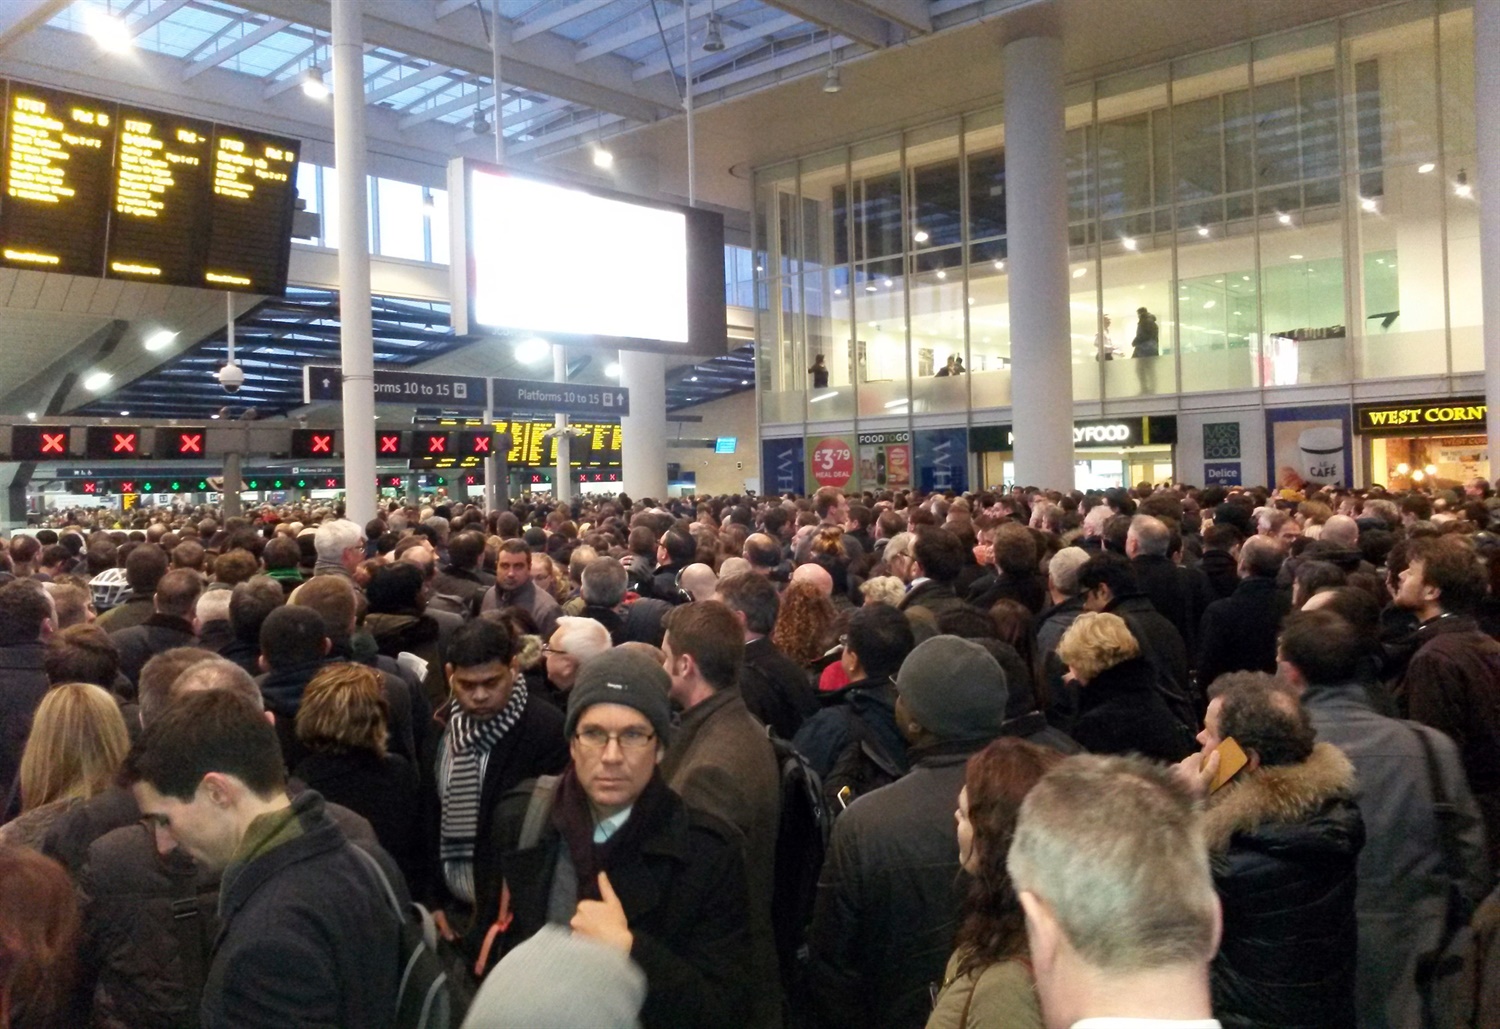 DfT confirms it will not implement overcrowding limits on busy services